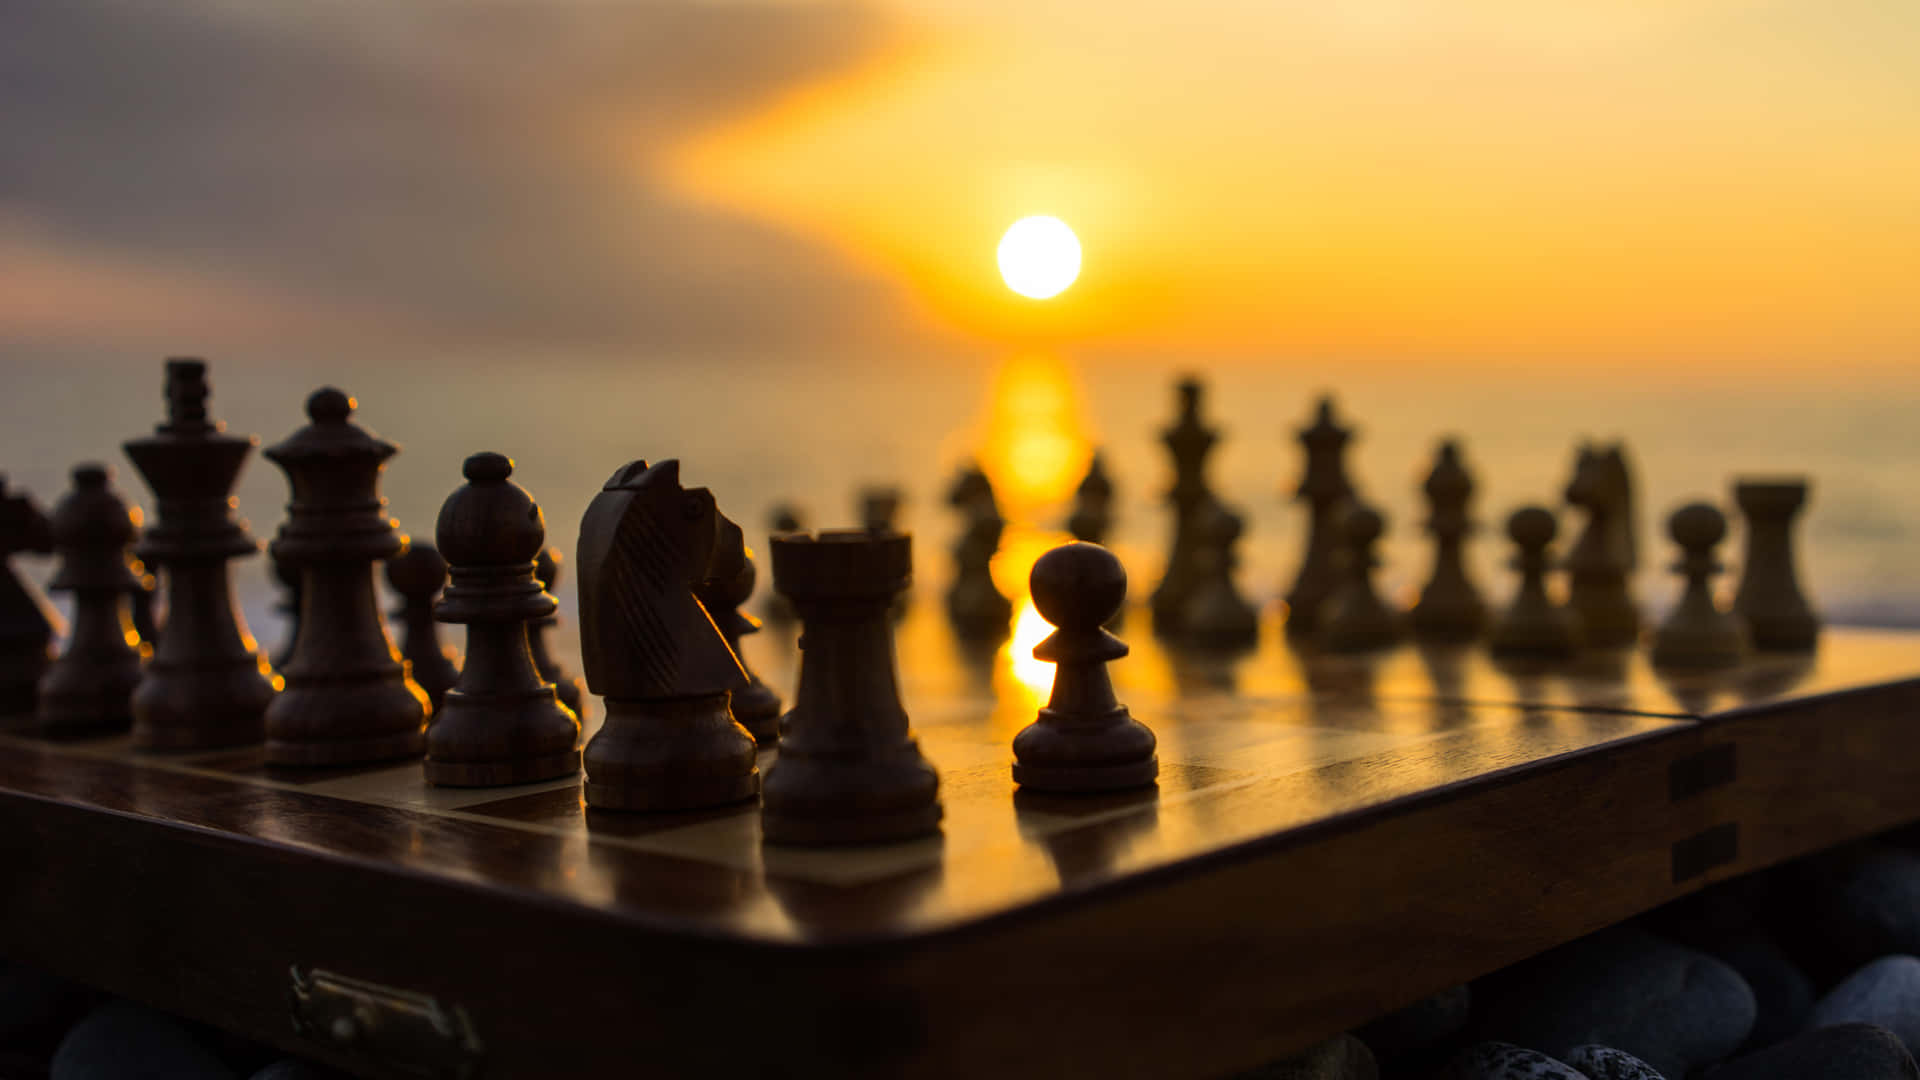 200+] Chess Pictures | Wallpapers.com